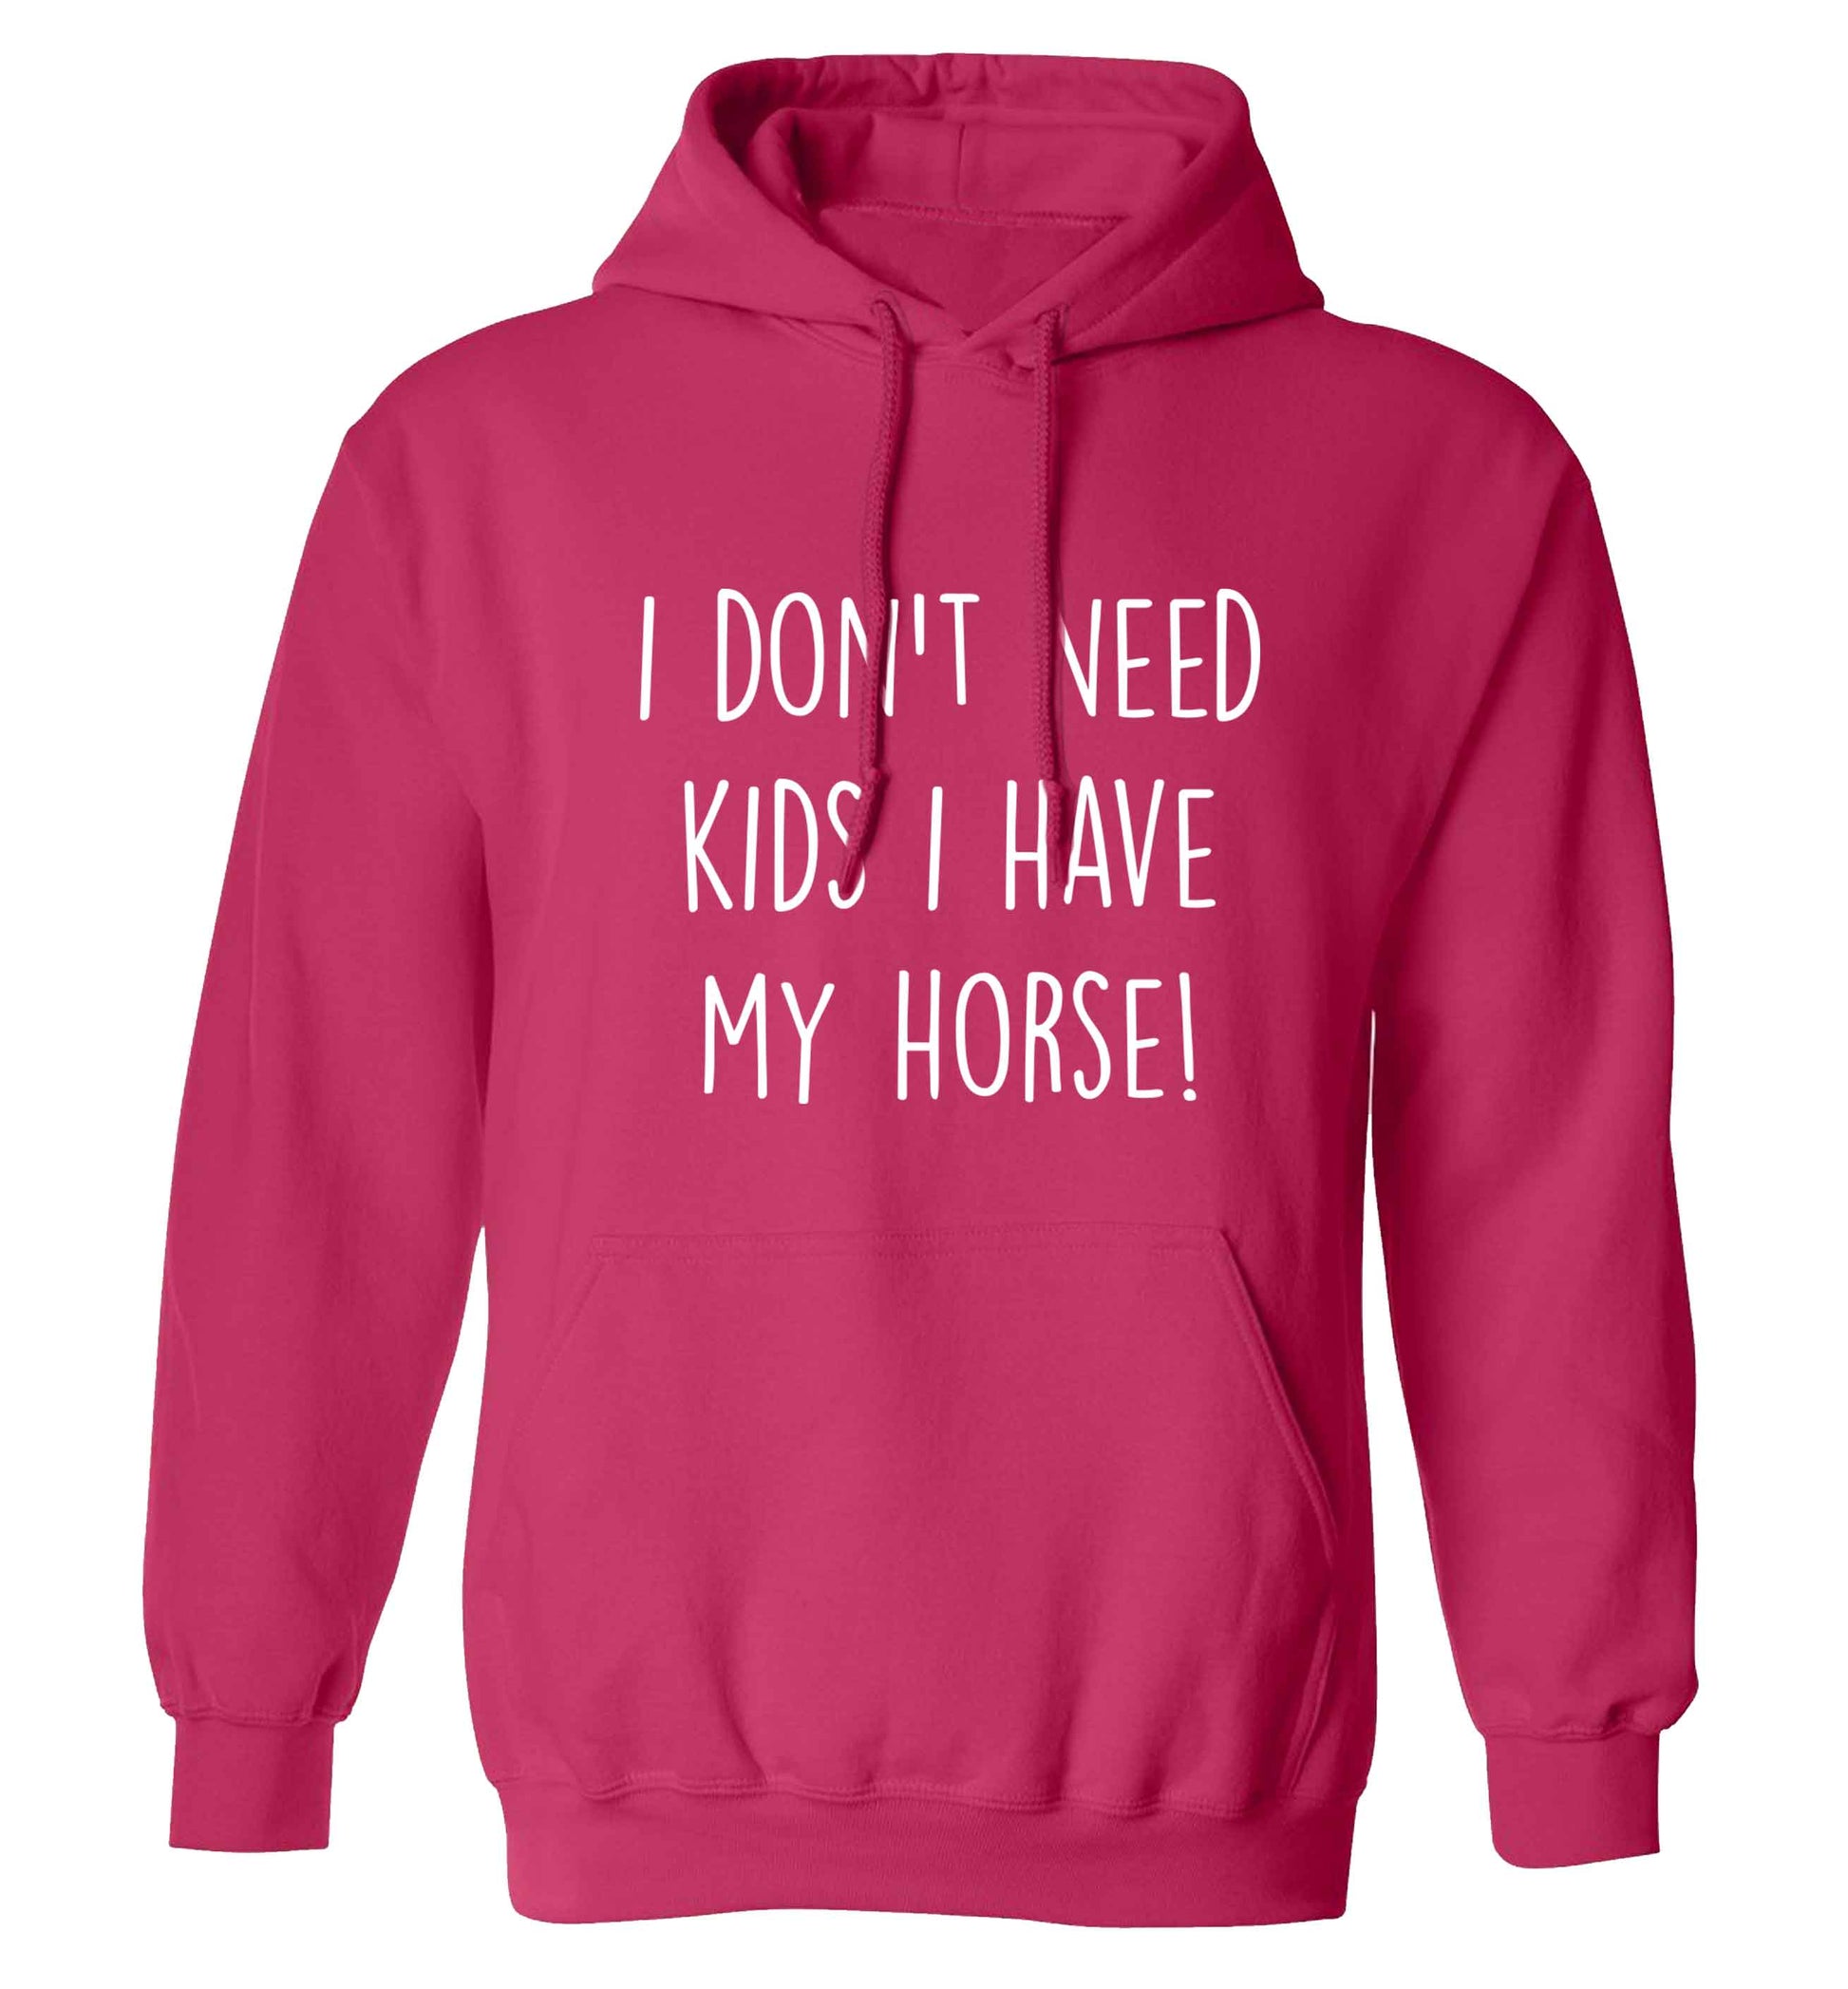 I don't need kids I have my horse adults unisex pink hoodie 2XL